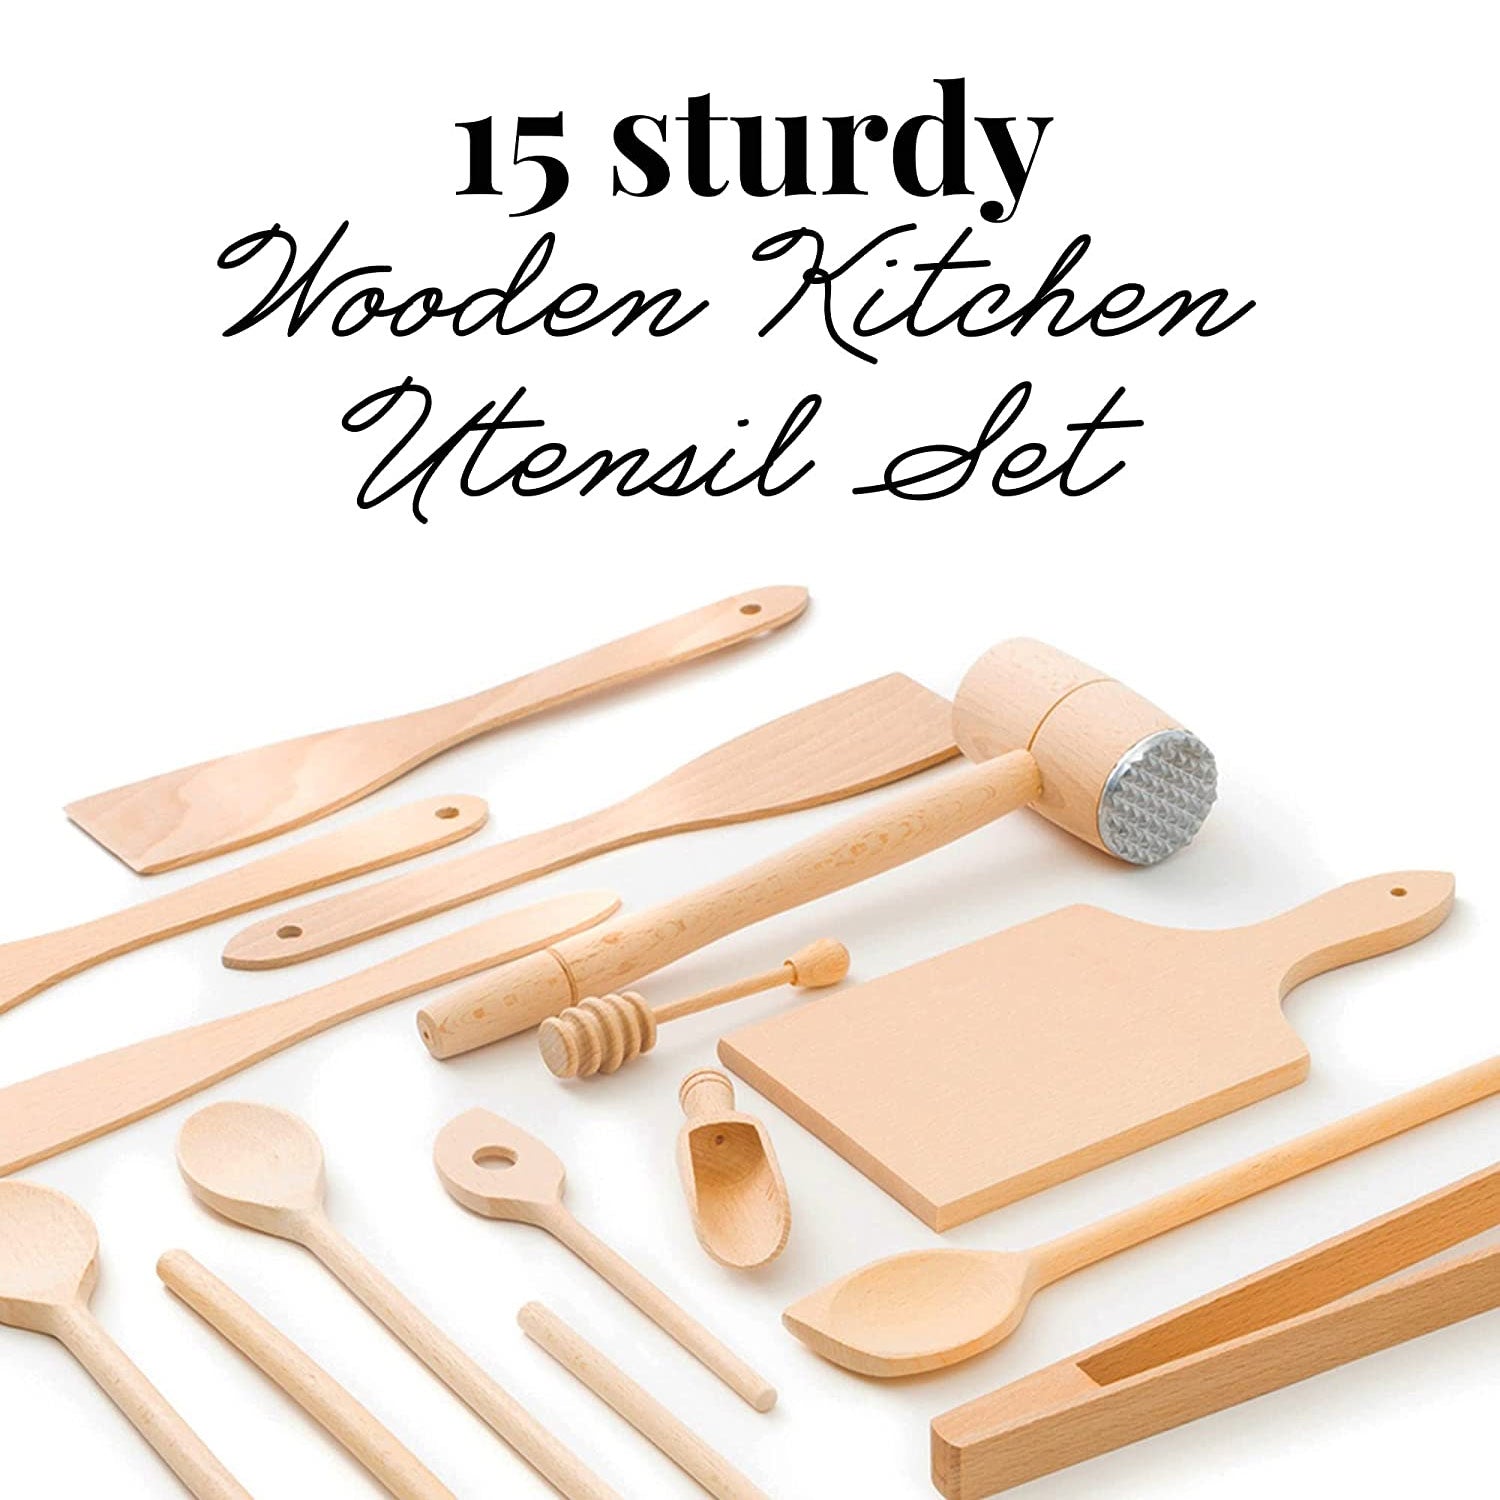 https://cdn.shopify.com/s/files/1/0515/2440/3381/products/15-piece-wooden-kitchen-utensil-set-cooking-spoons-turners-honey-spoon-bbq-tongs-cutting-982.jpg